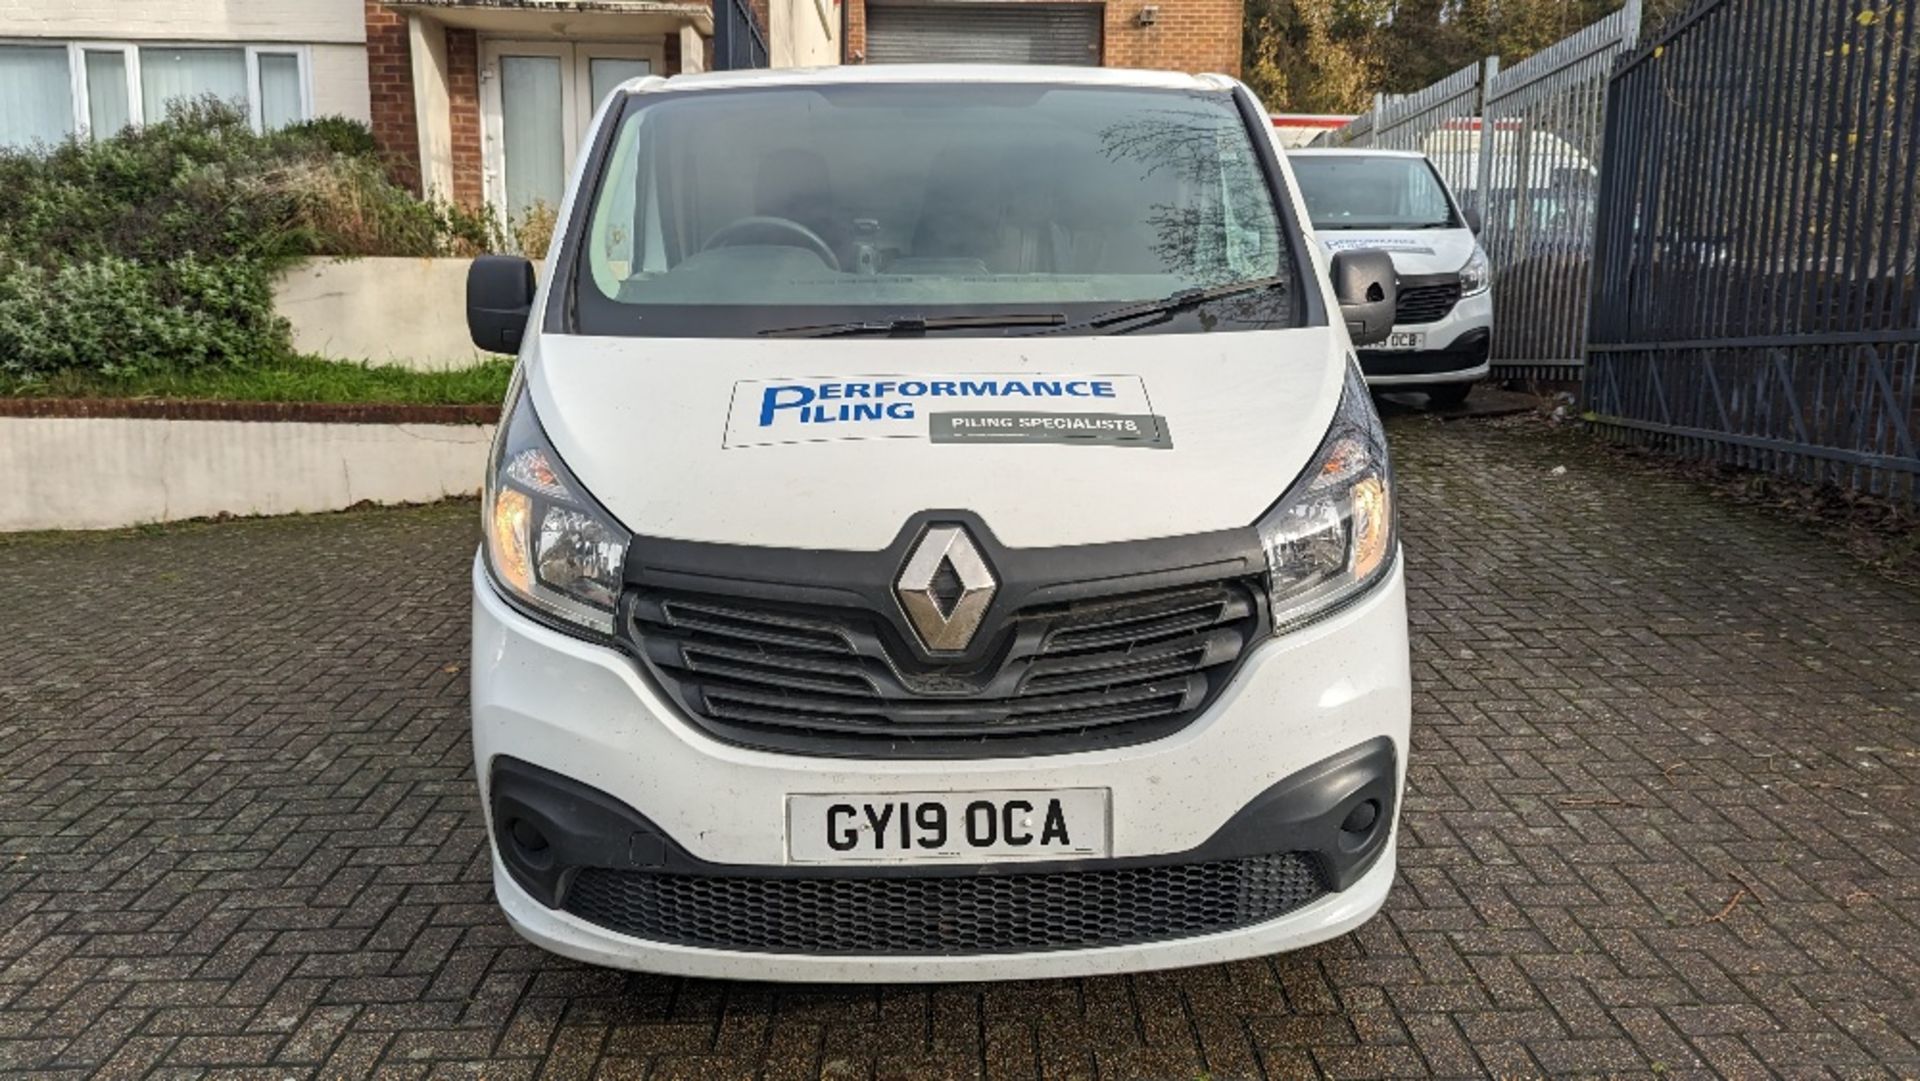 GY19 OCA - Renault Trafic SL27 Business+ DC - Image 9 of 20